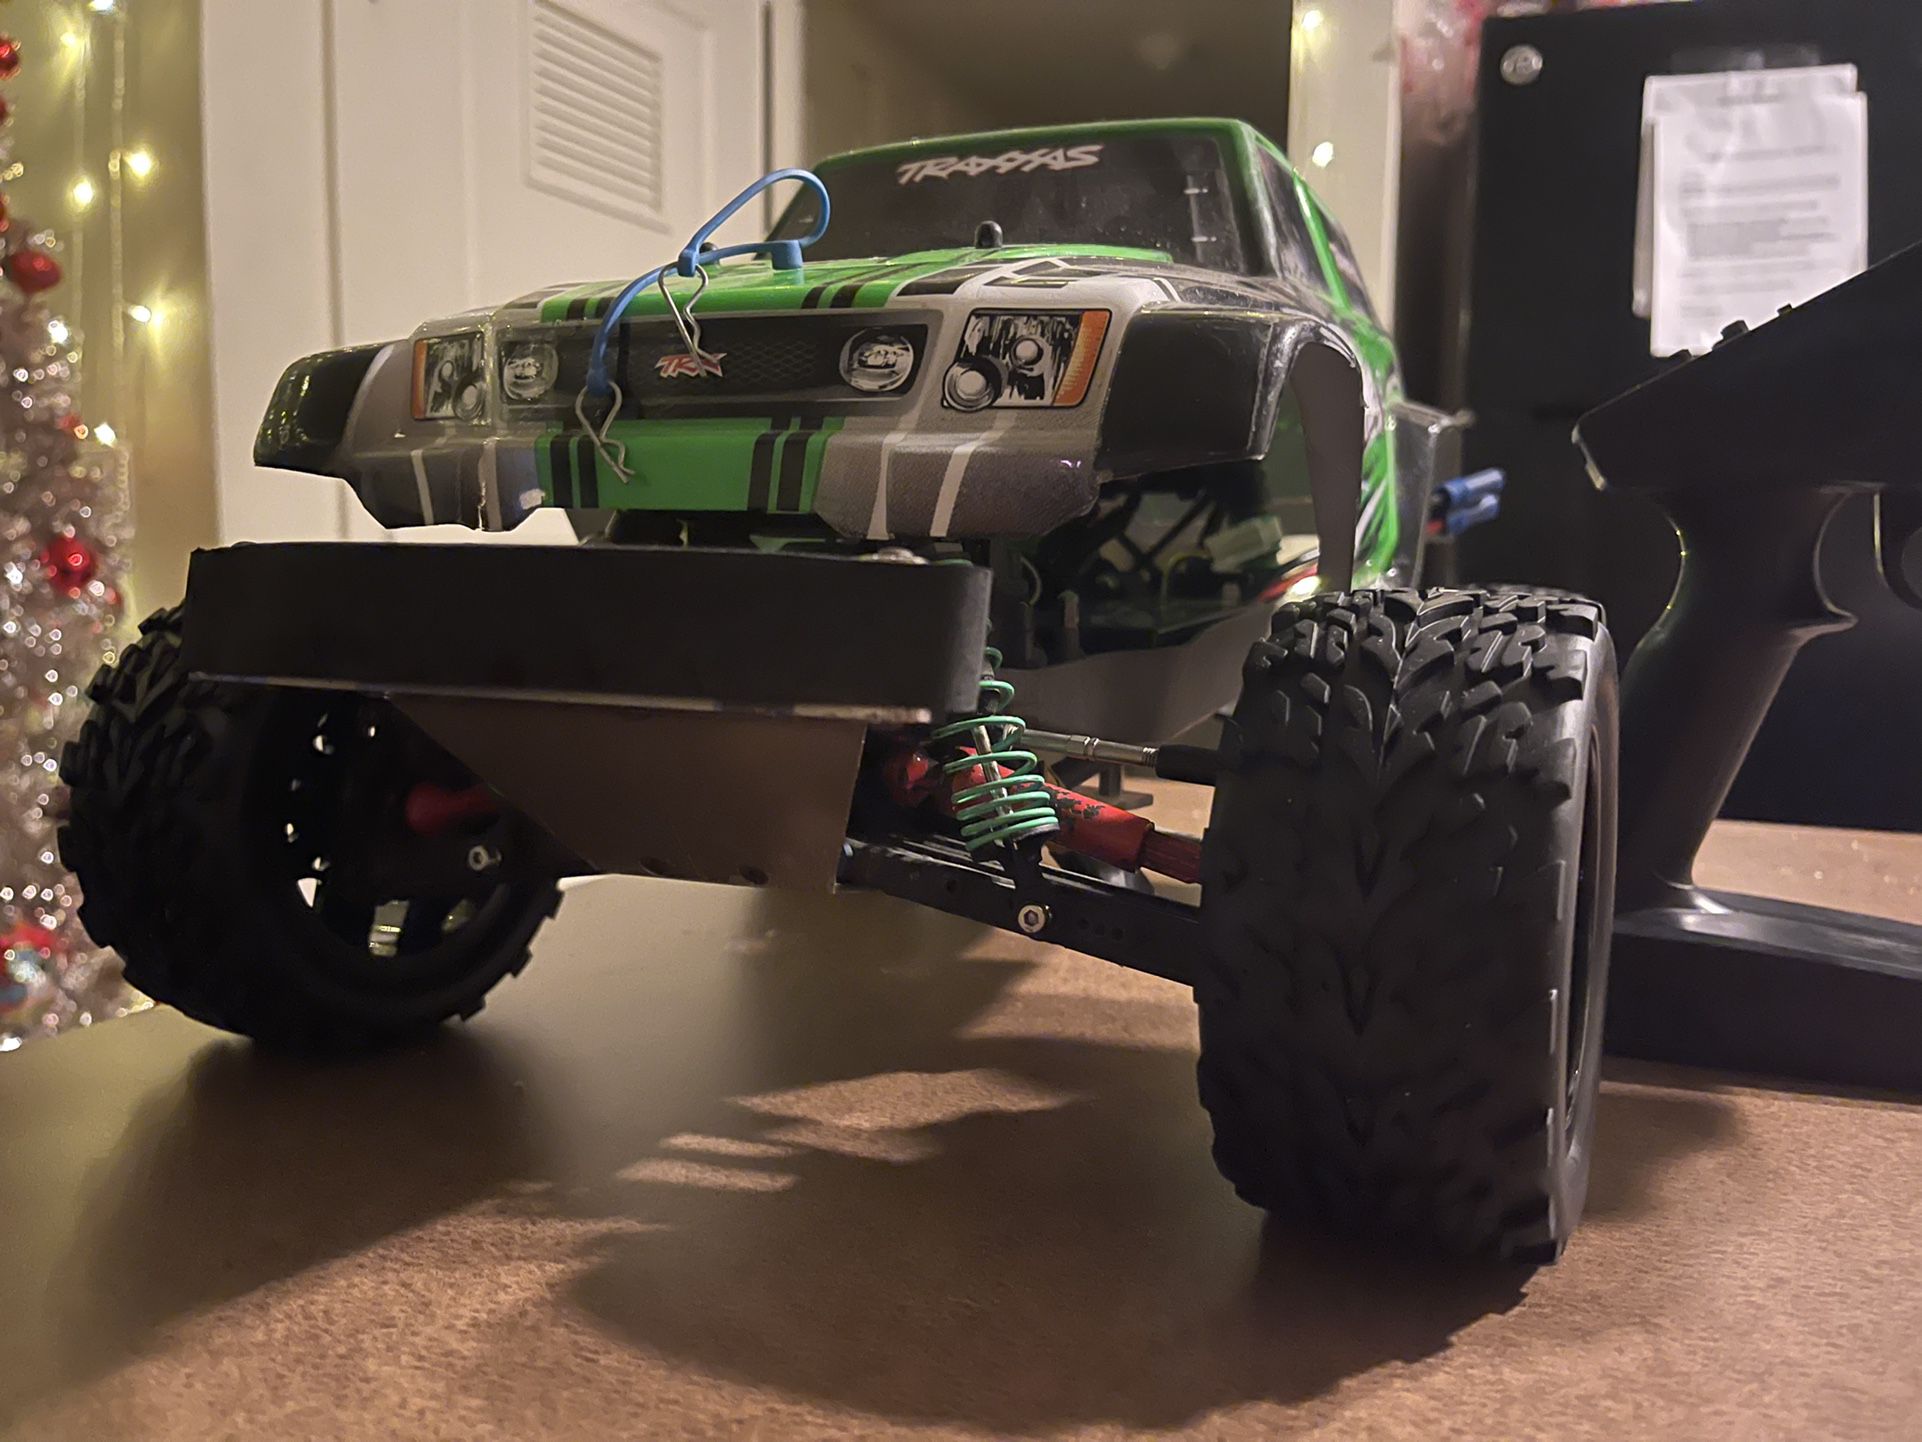 Traxxas Stampede 4x4 Modded, Telluride Body (NEED GONE ASAP, SHOOT ME AN OFFER)